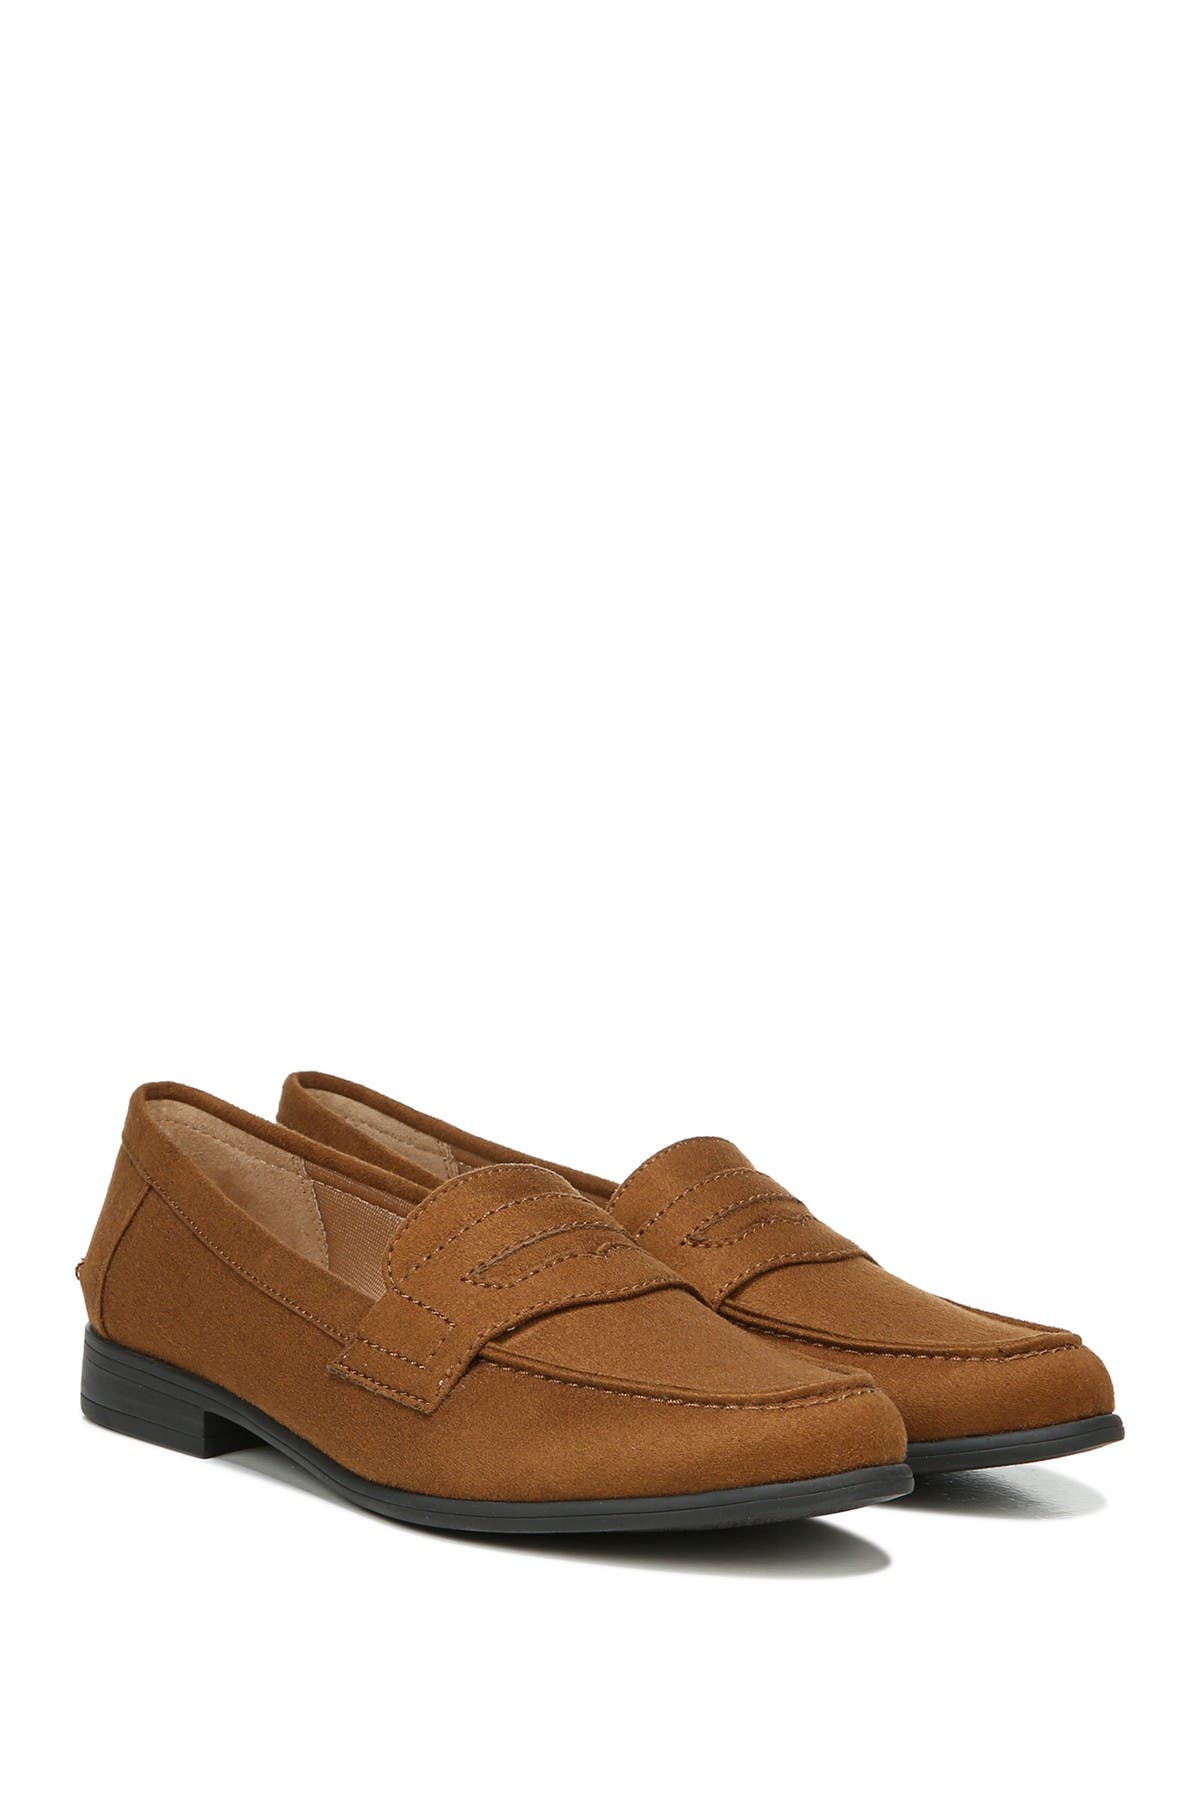 LifeStride | Madison Penny Loafer - Wide Width Available | Nordstrom Rack